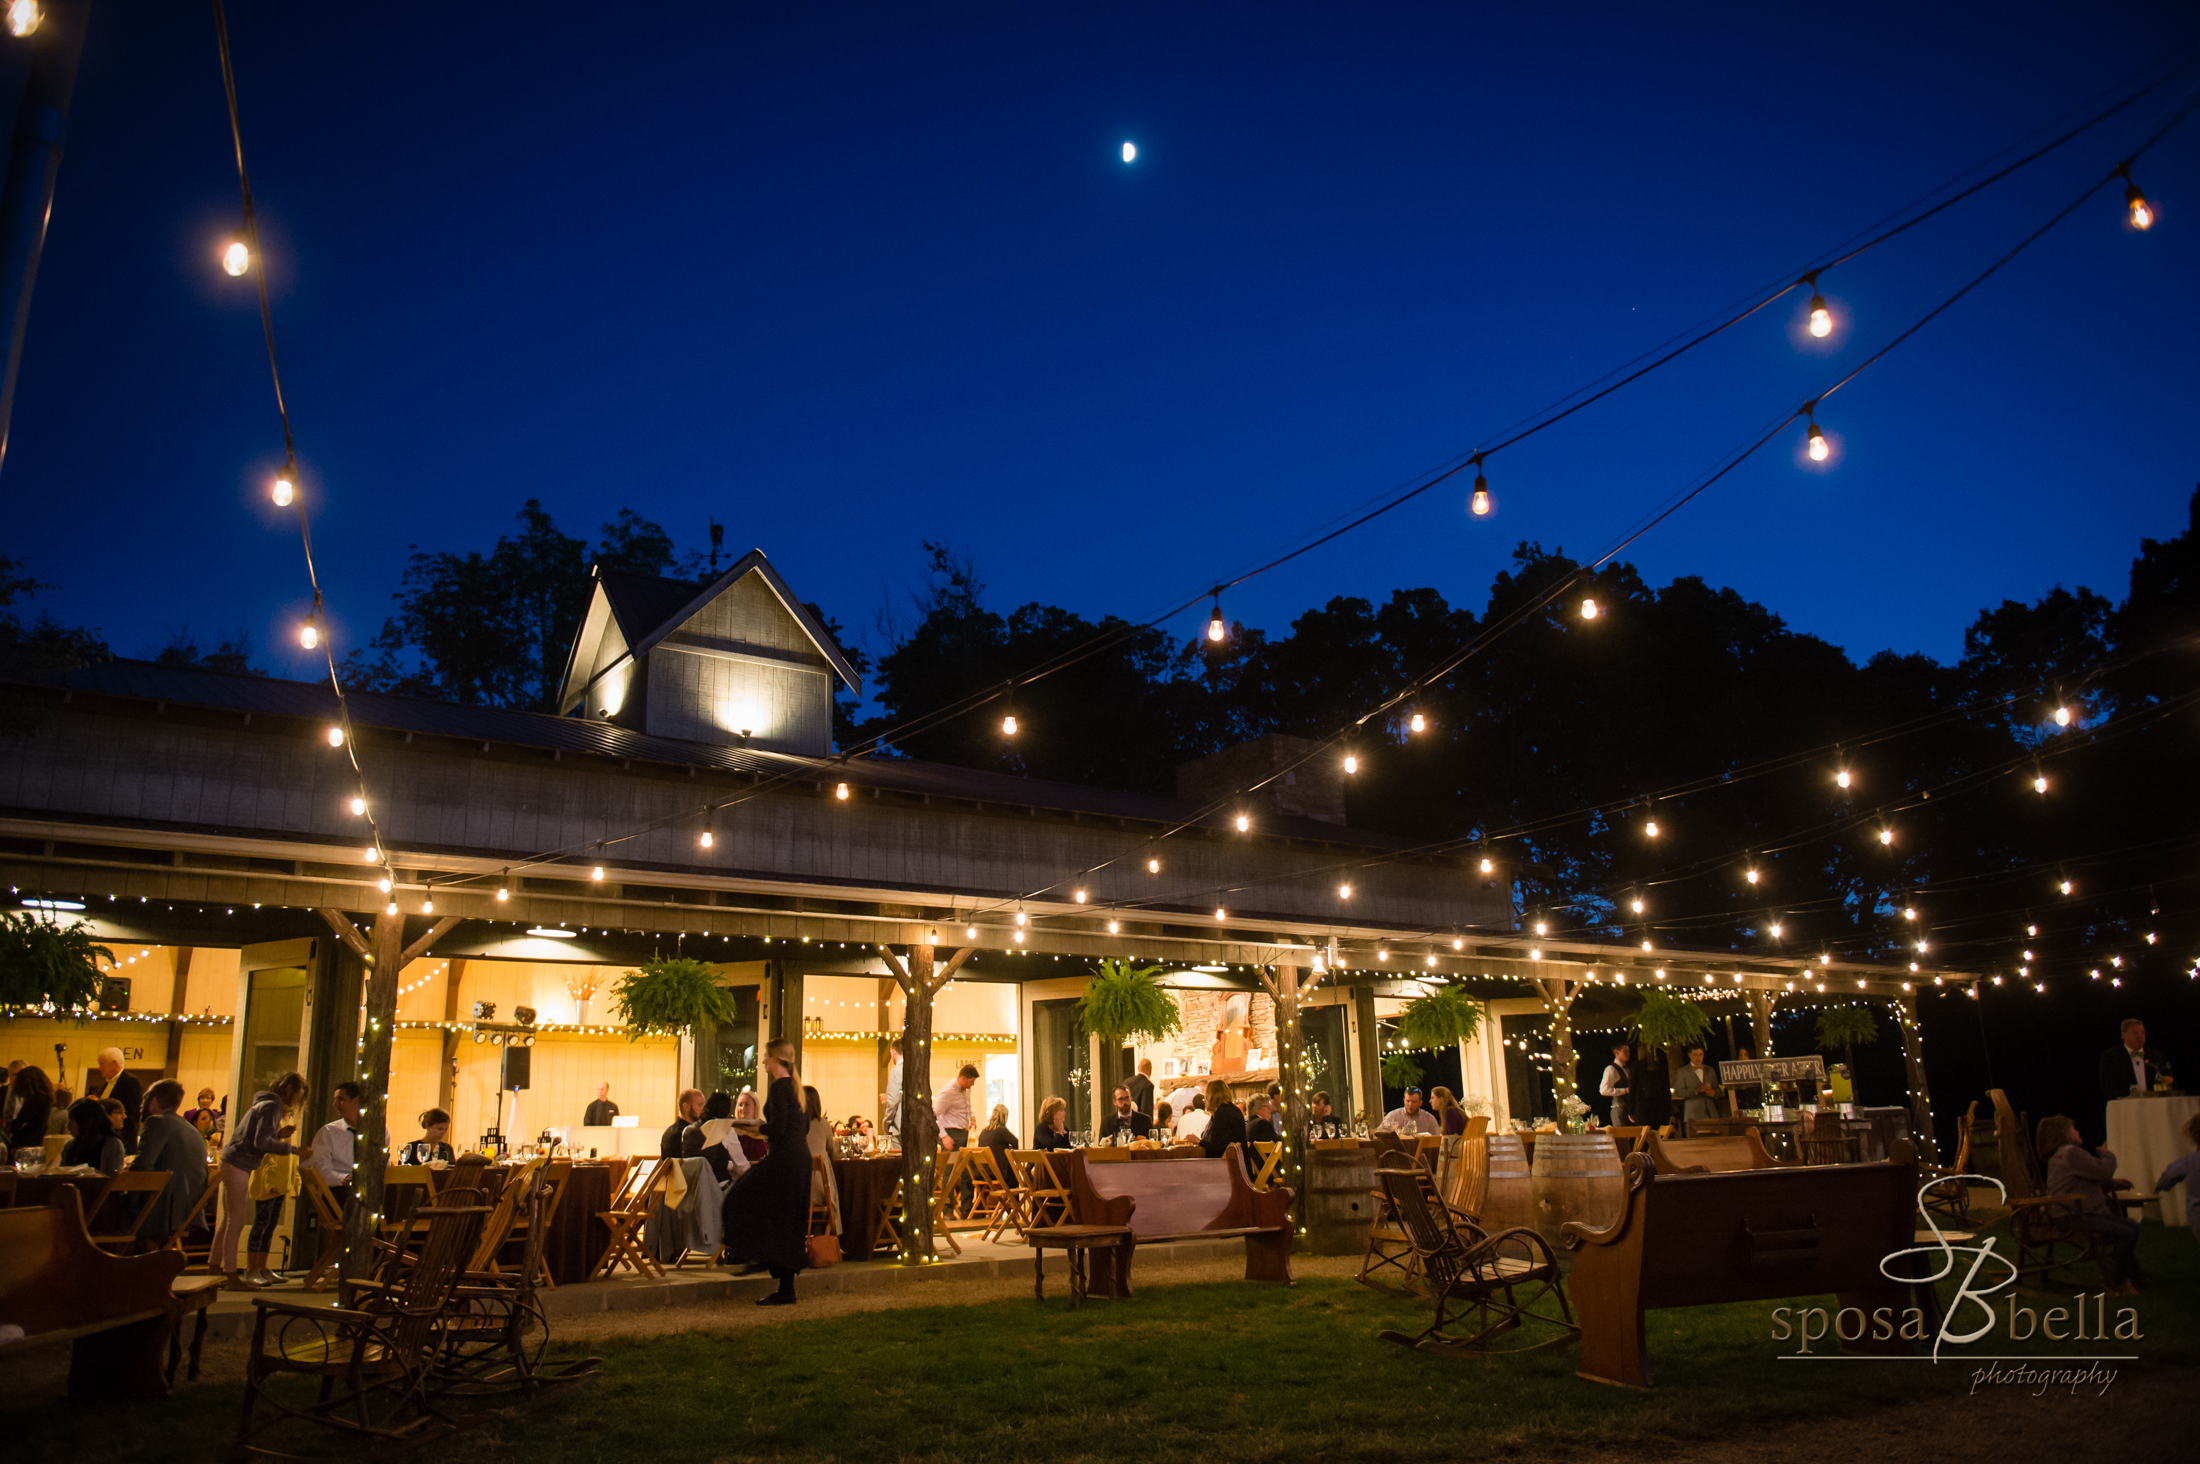  The Farm has a great indoor/outdoor feel that allows guests to flow through the event space all night. 